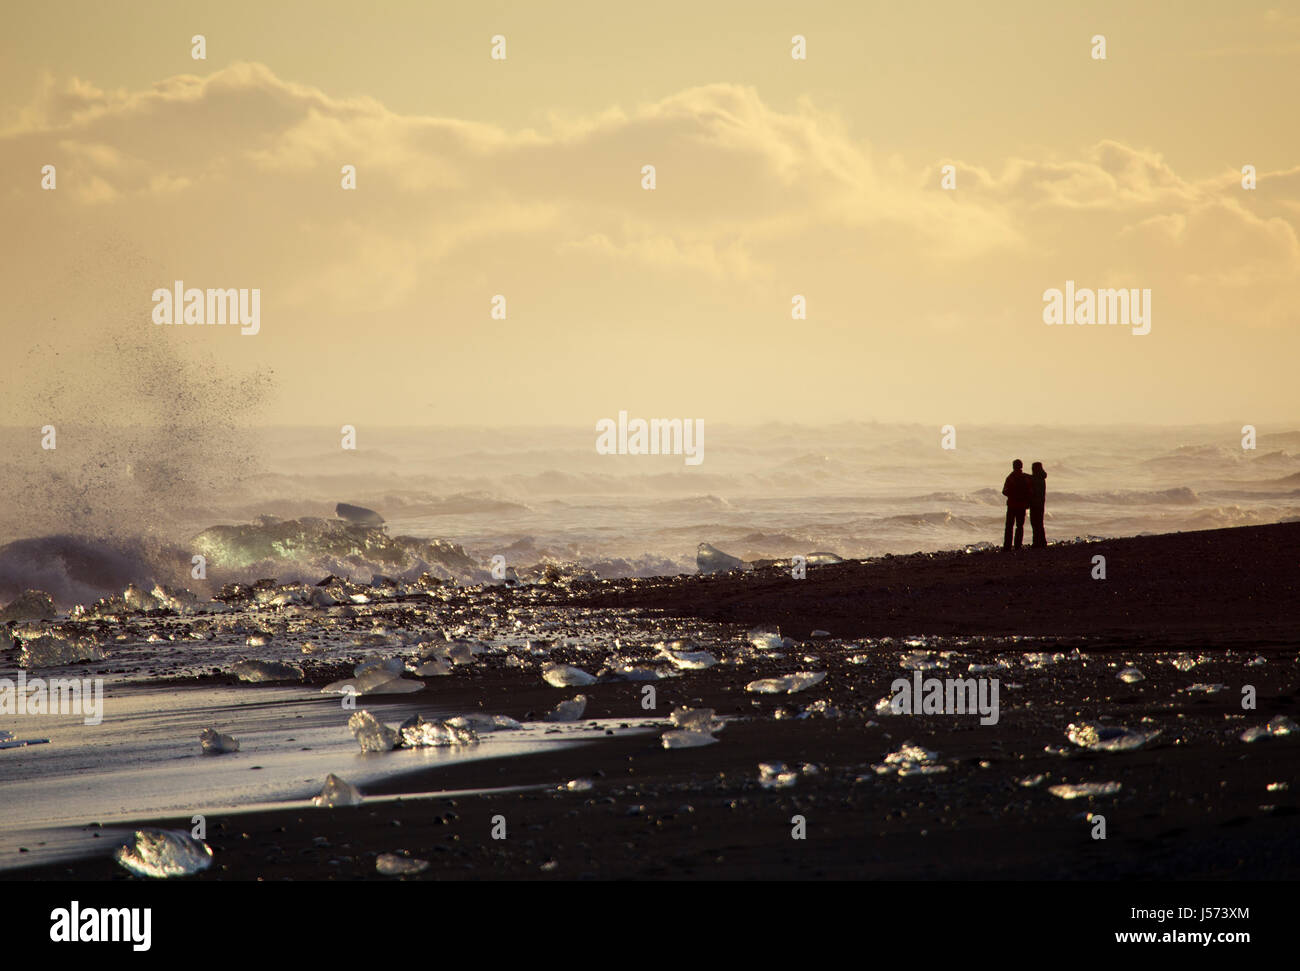 Two people enjoying the sunset at Diamond beach near the Glacier lagoon in south east Iceland Stock Photo